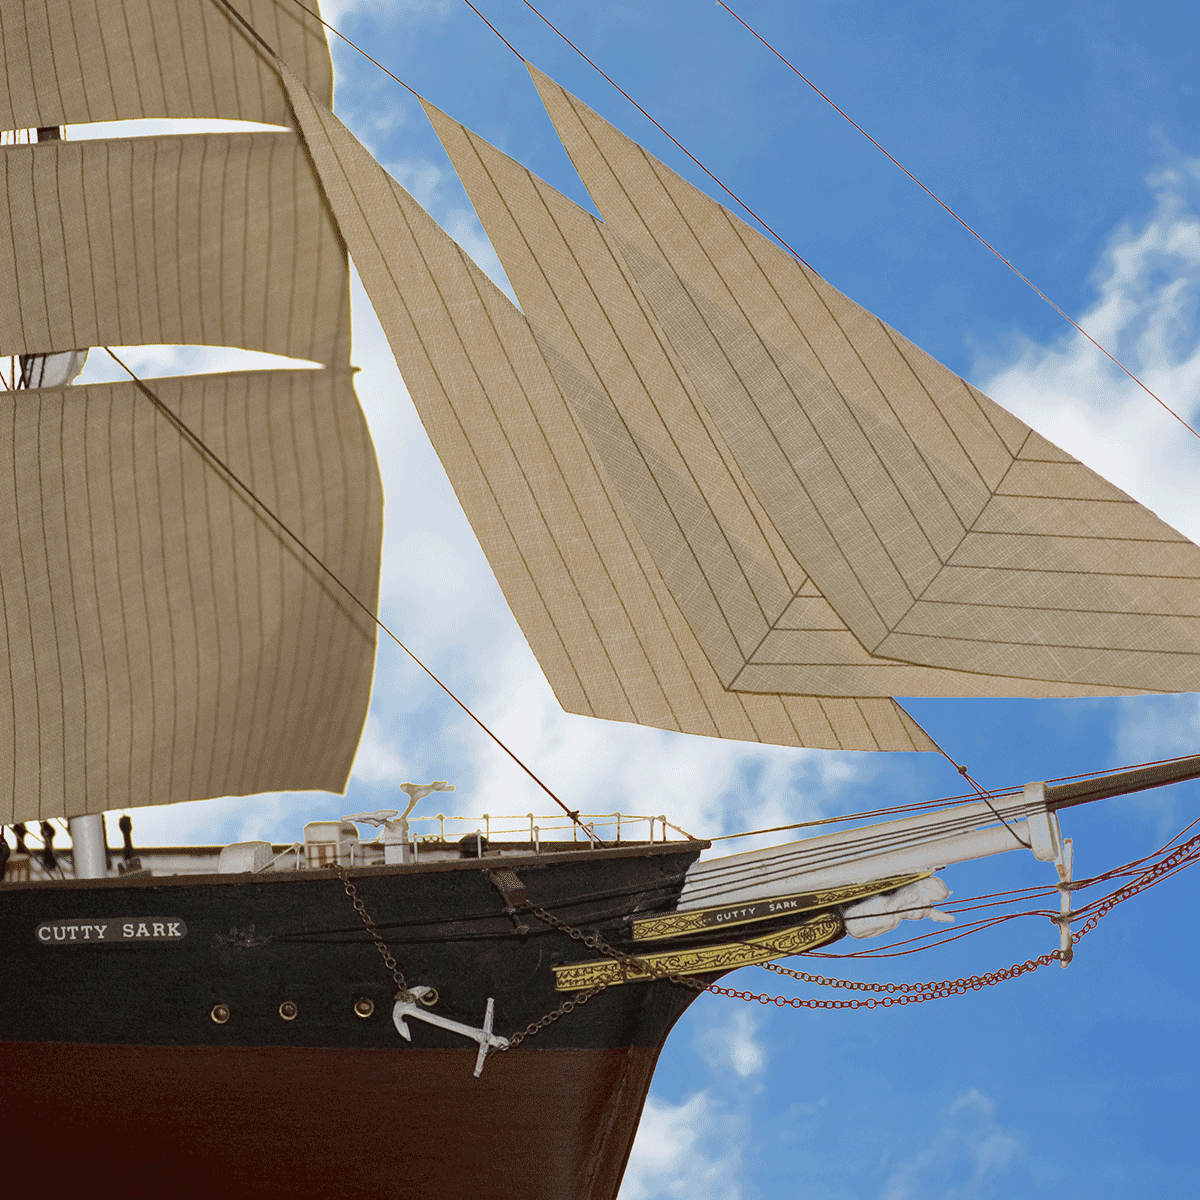 https://www.thetoolroom.co.uk/wp-content/uploads/2015/09/NTR-projects-cutty-sark-2.png